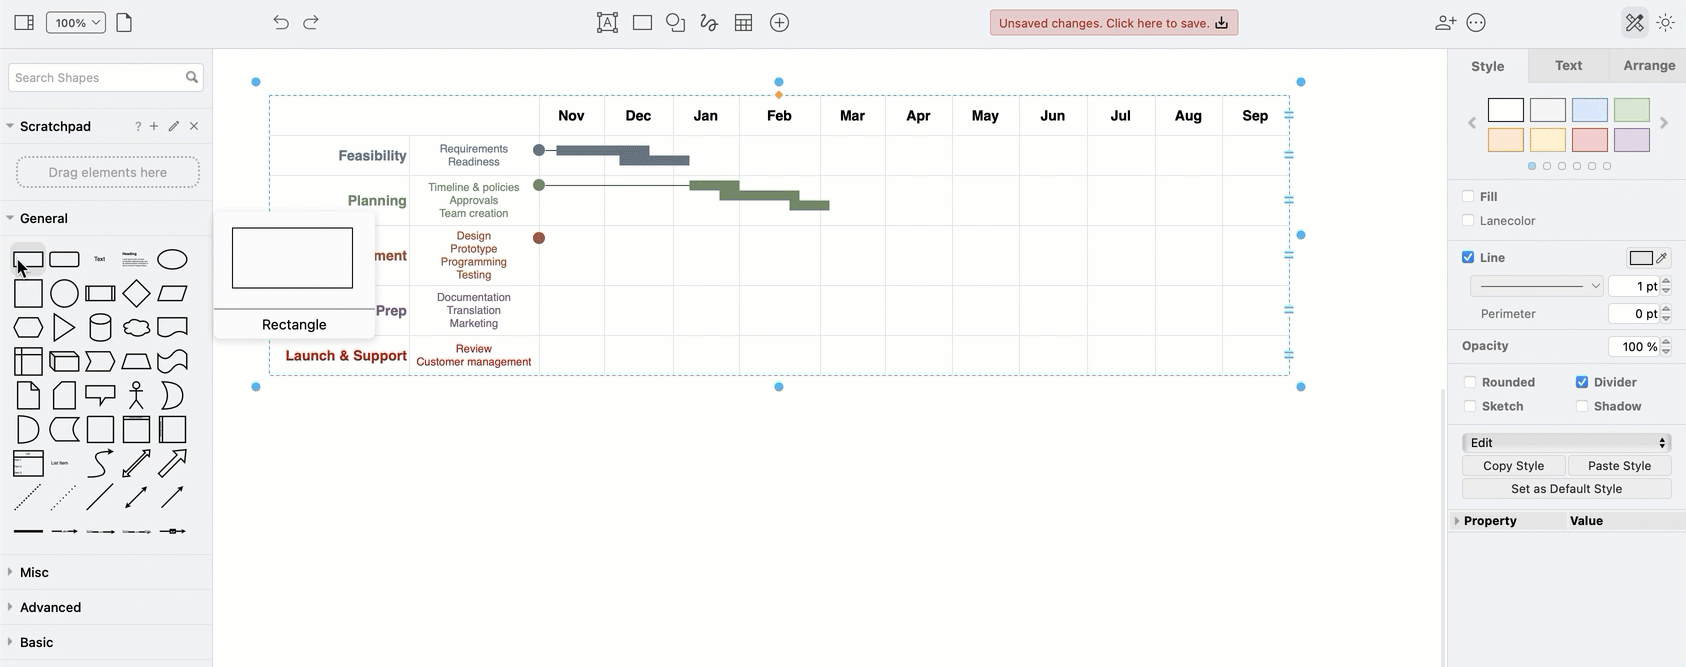 Drag and drop rectangles onto your Gantt chart table in draw.io